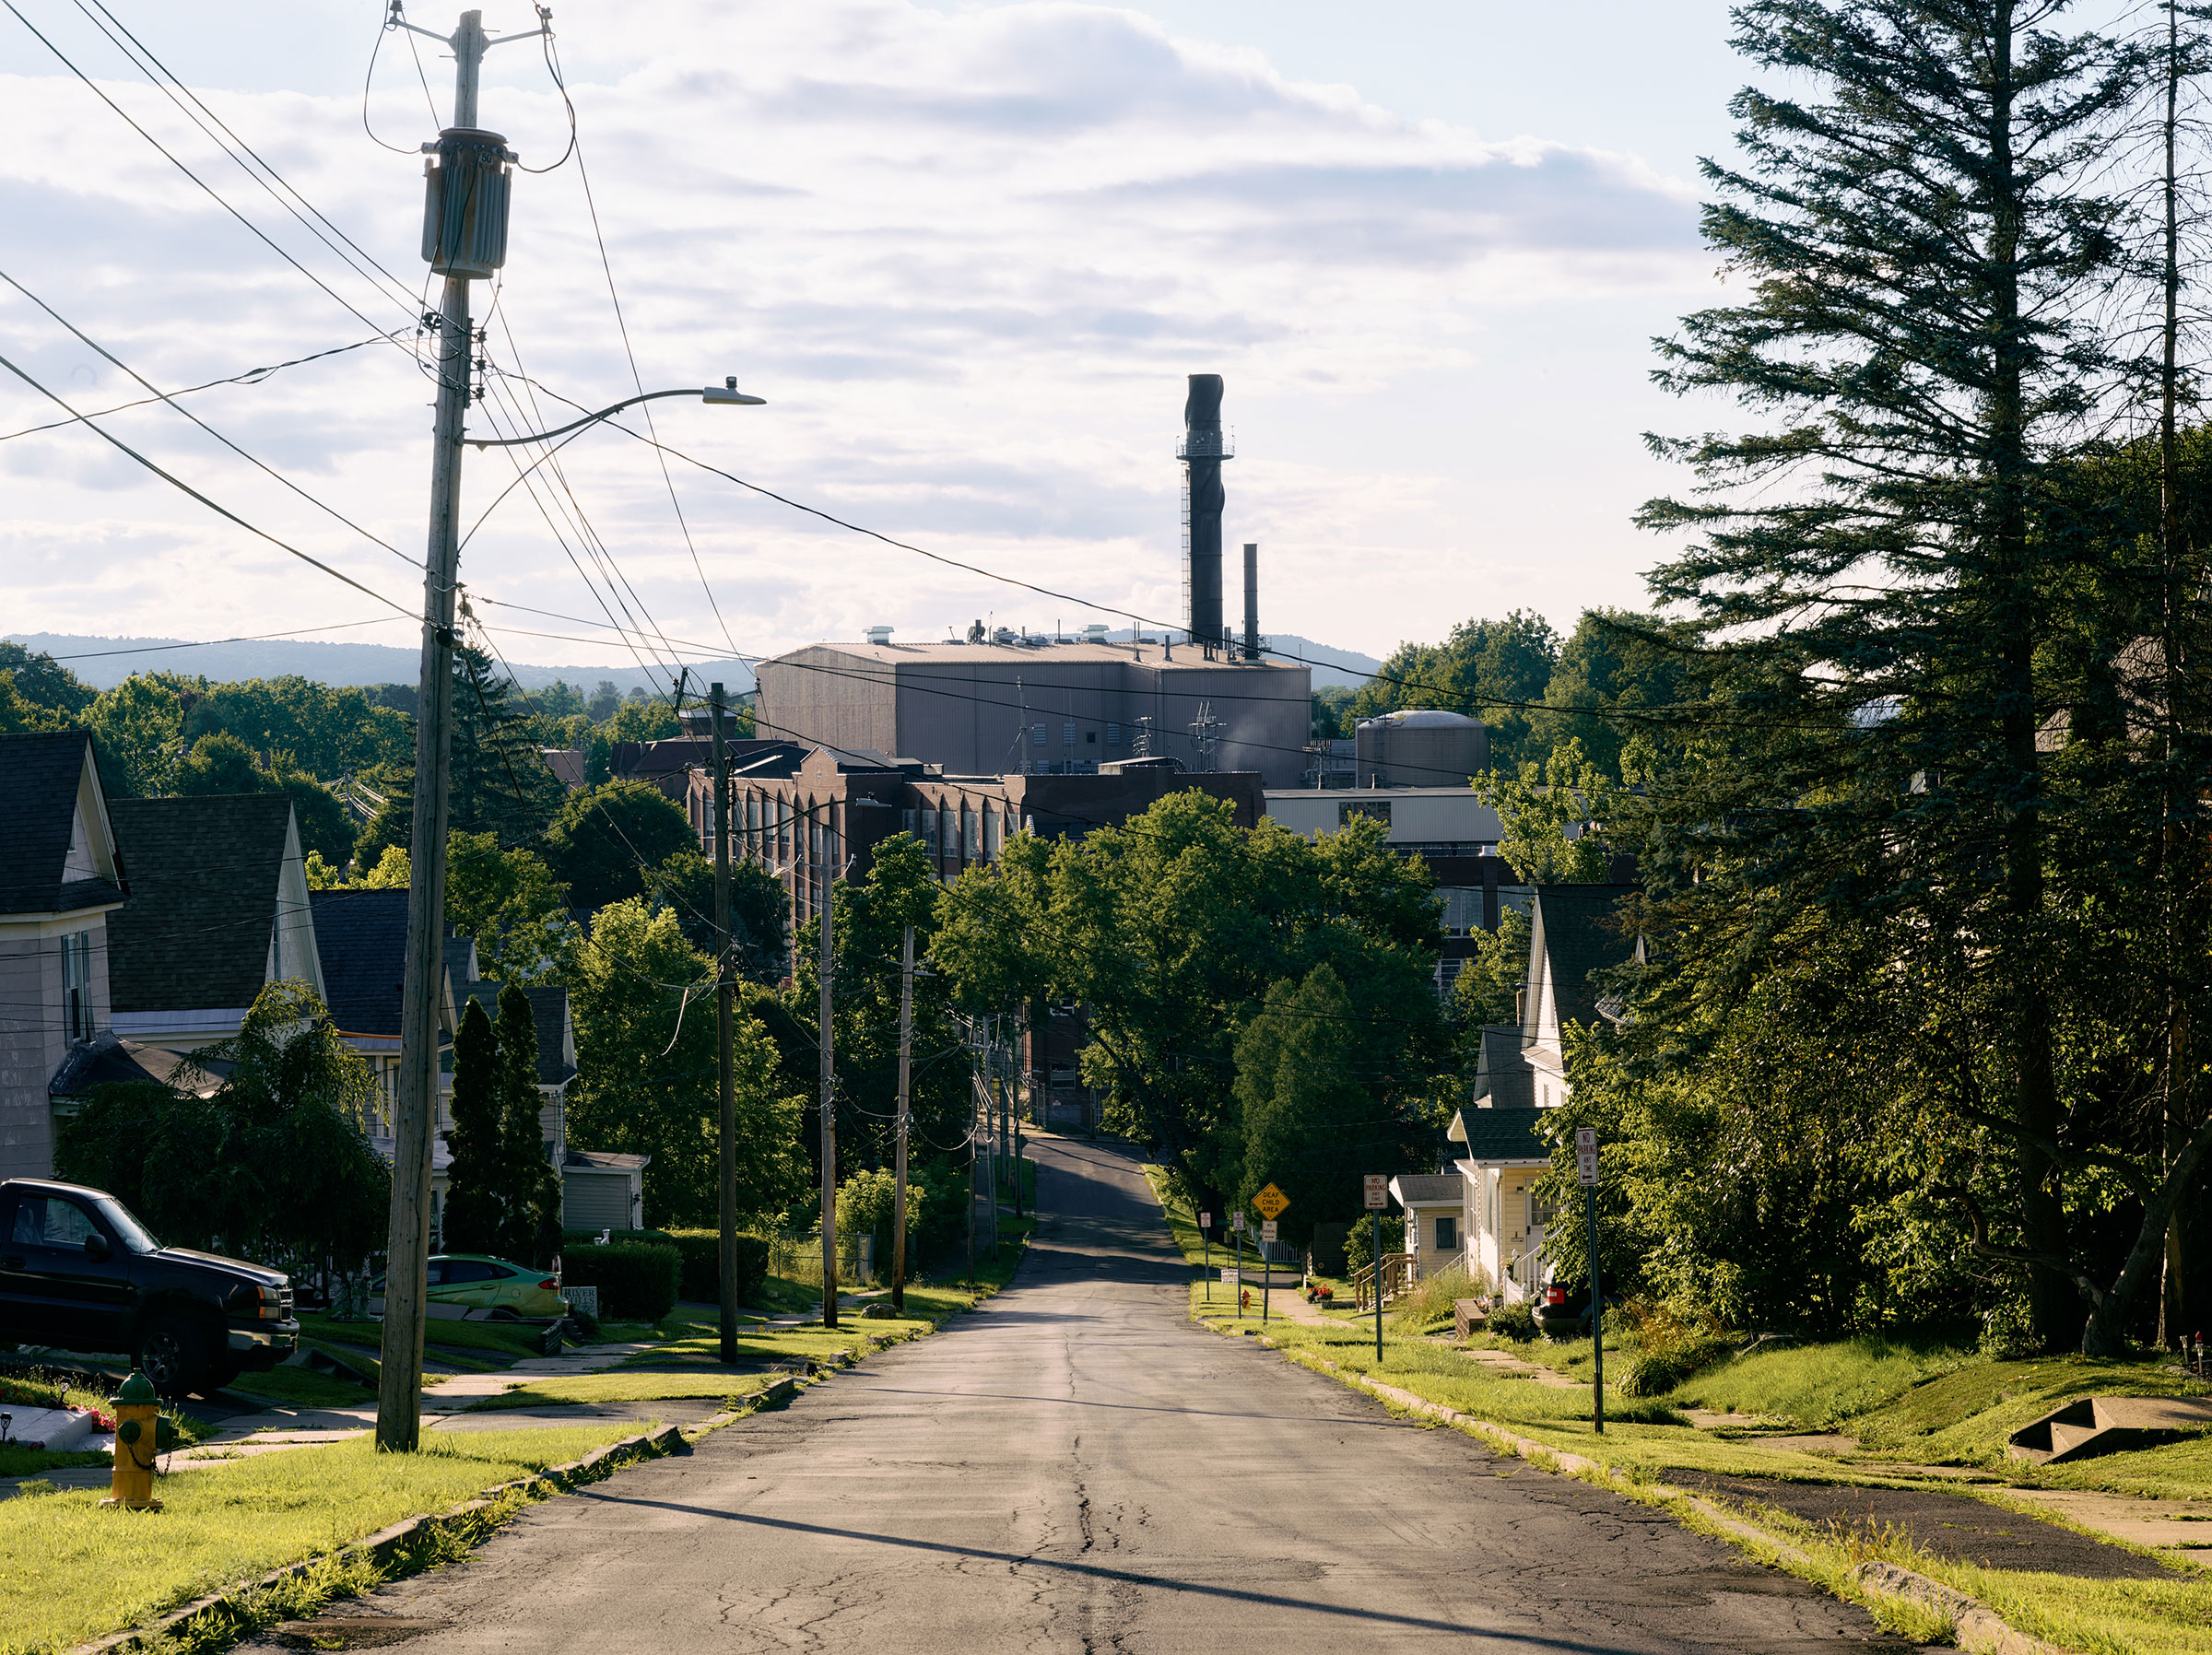 The Remington Arms factory is the centerpiece of Ilion, N.Y. (Jason Koxvold for TIME)